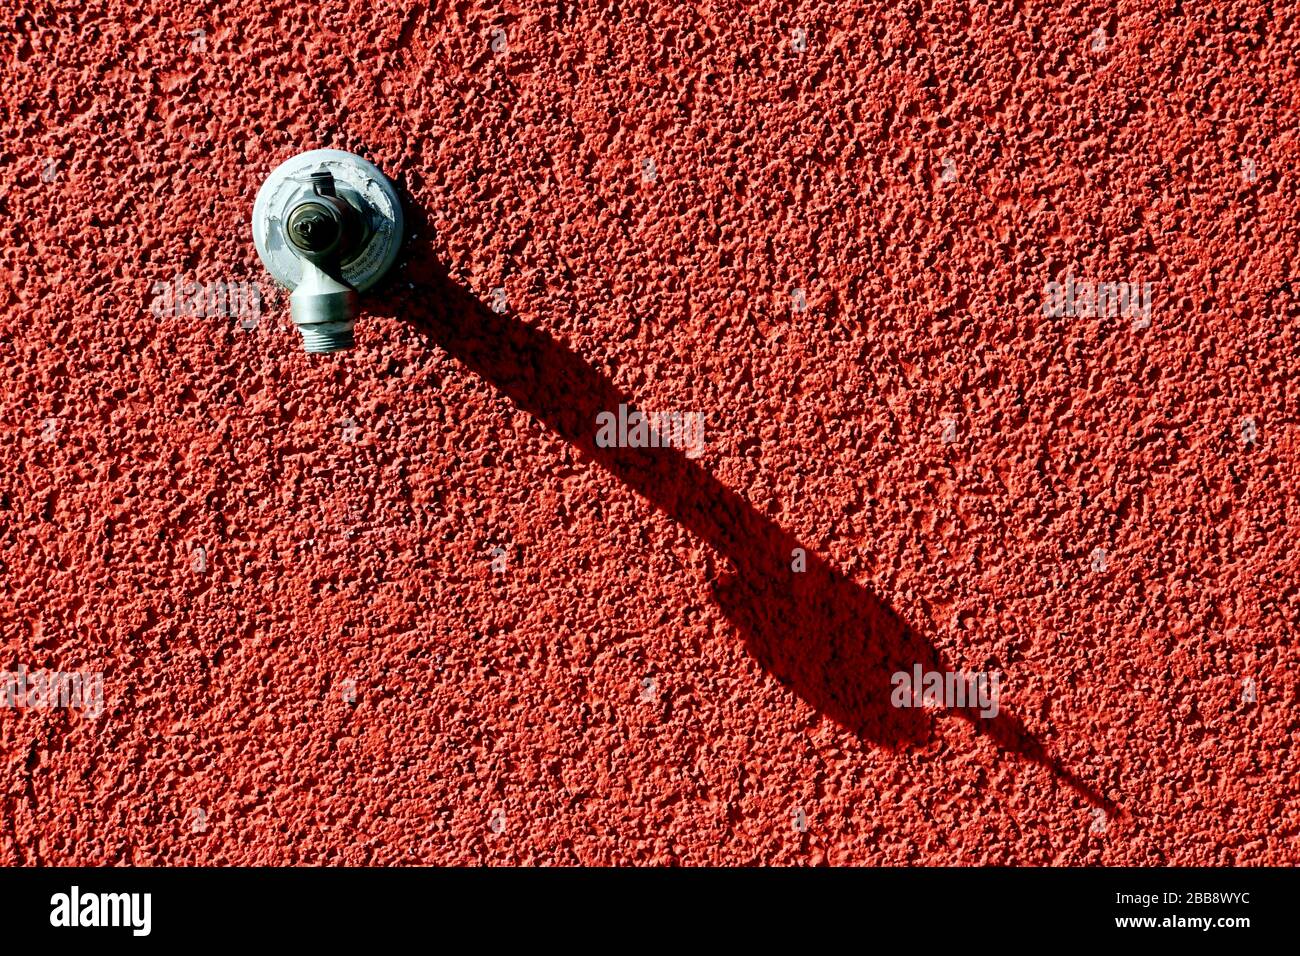 Wand Verputz High Resolution Stock Photography and Images - Alamy